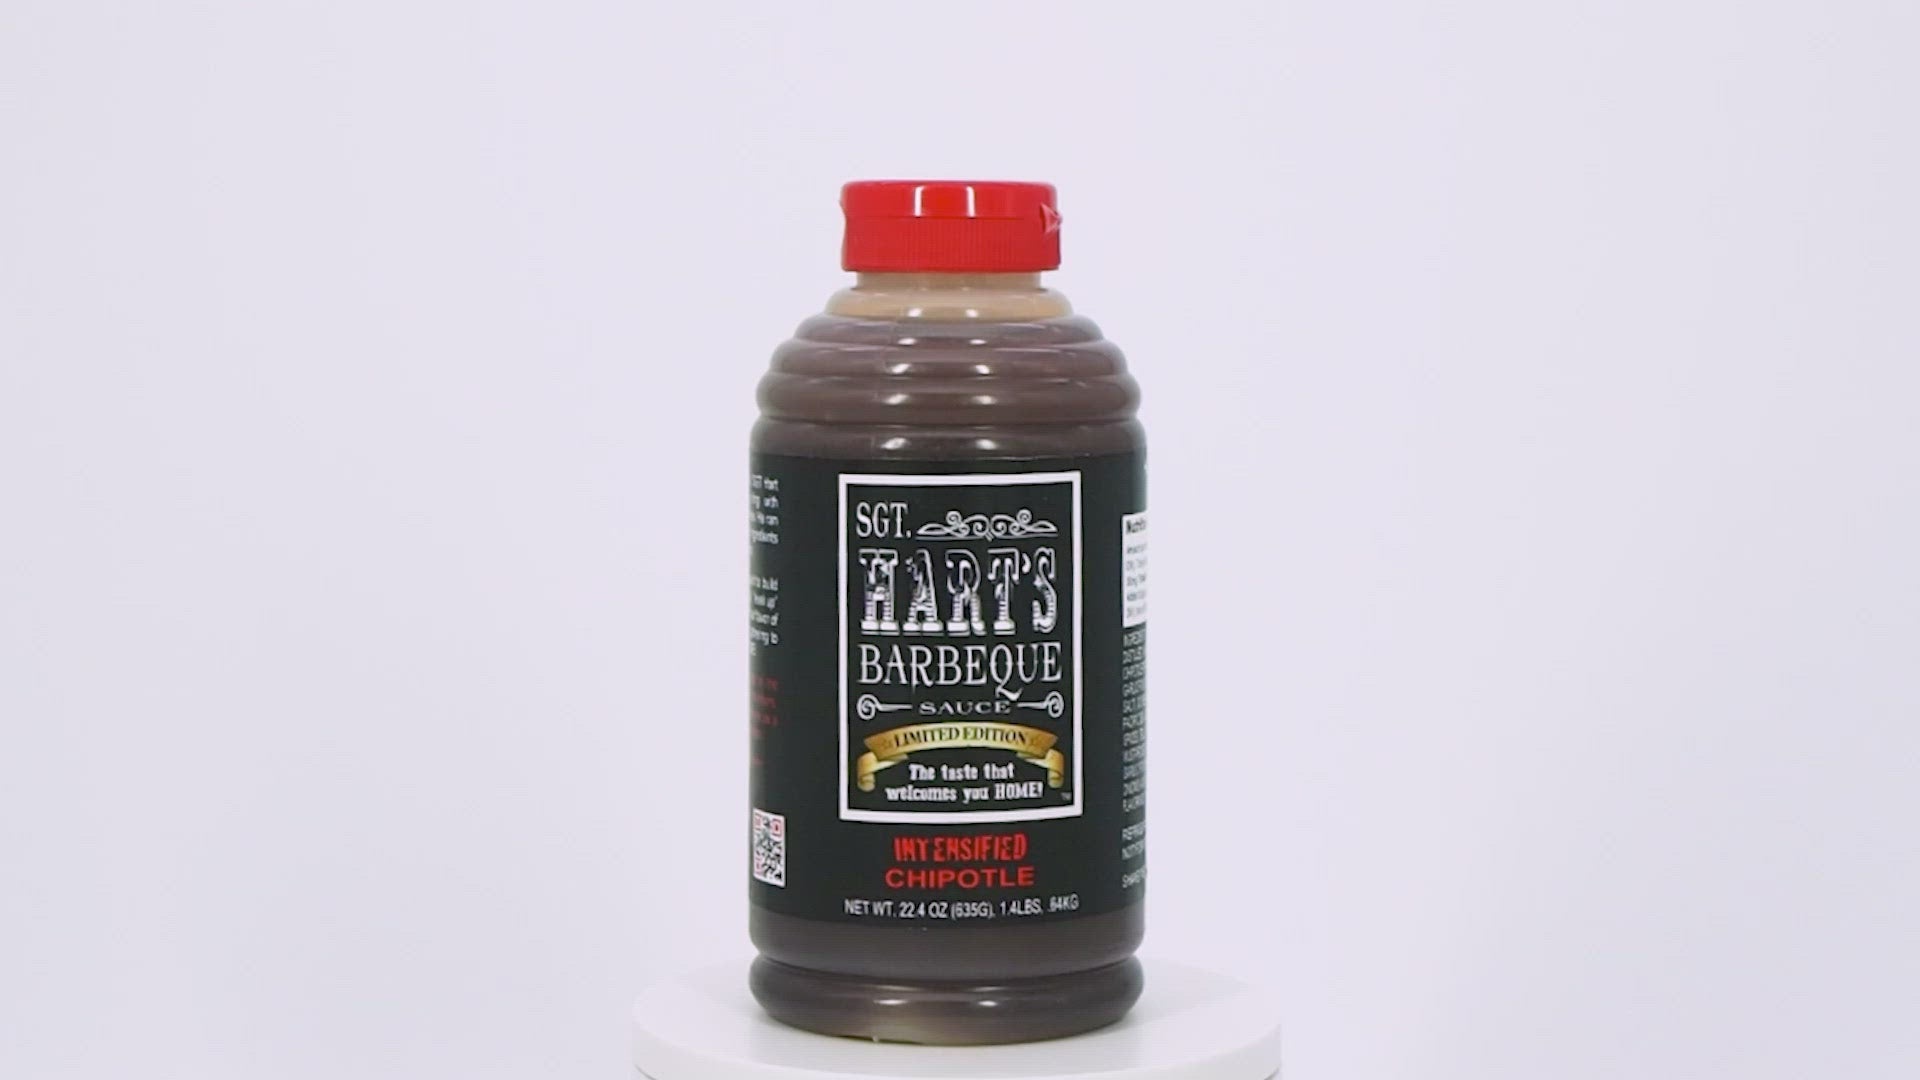 Intensified Chipotle flavor SGT Harts Barbecue Sauce video